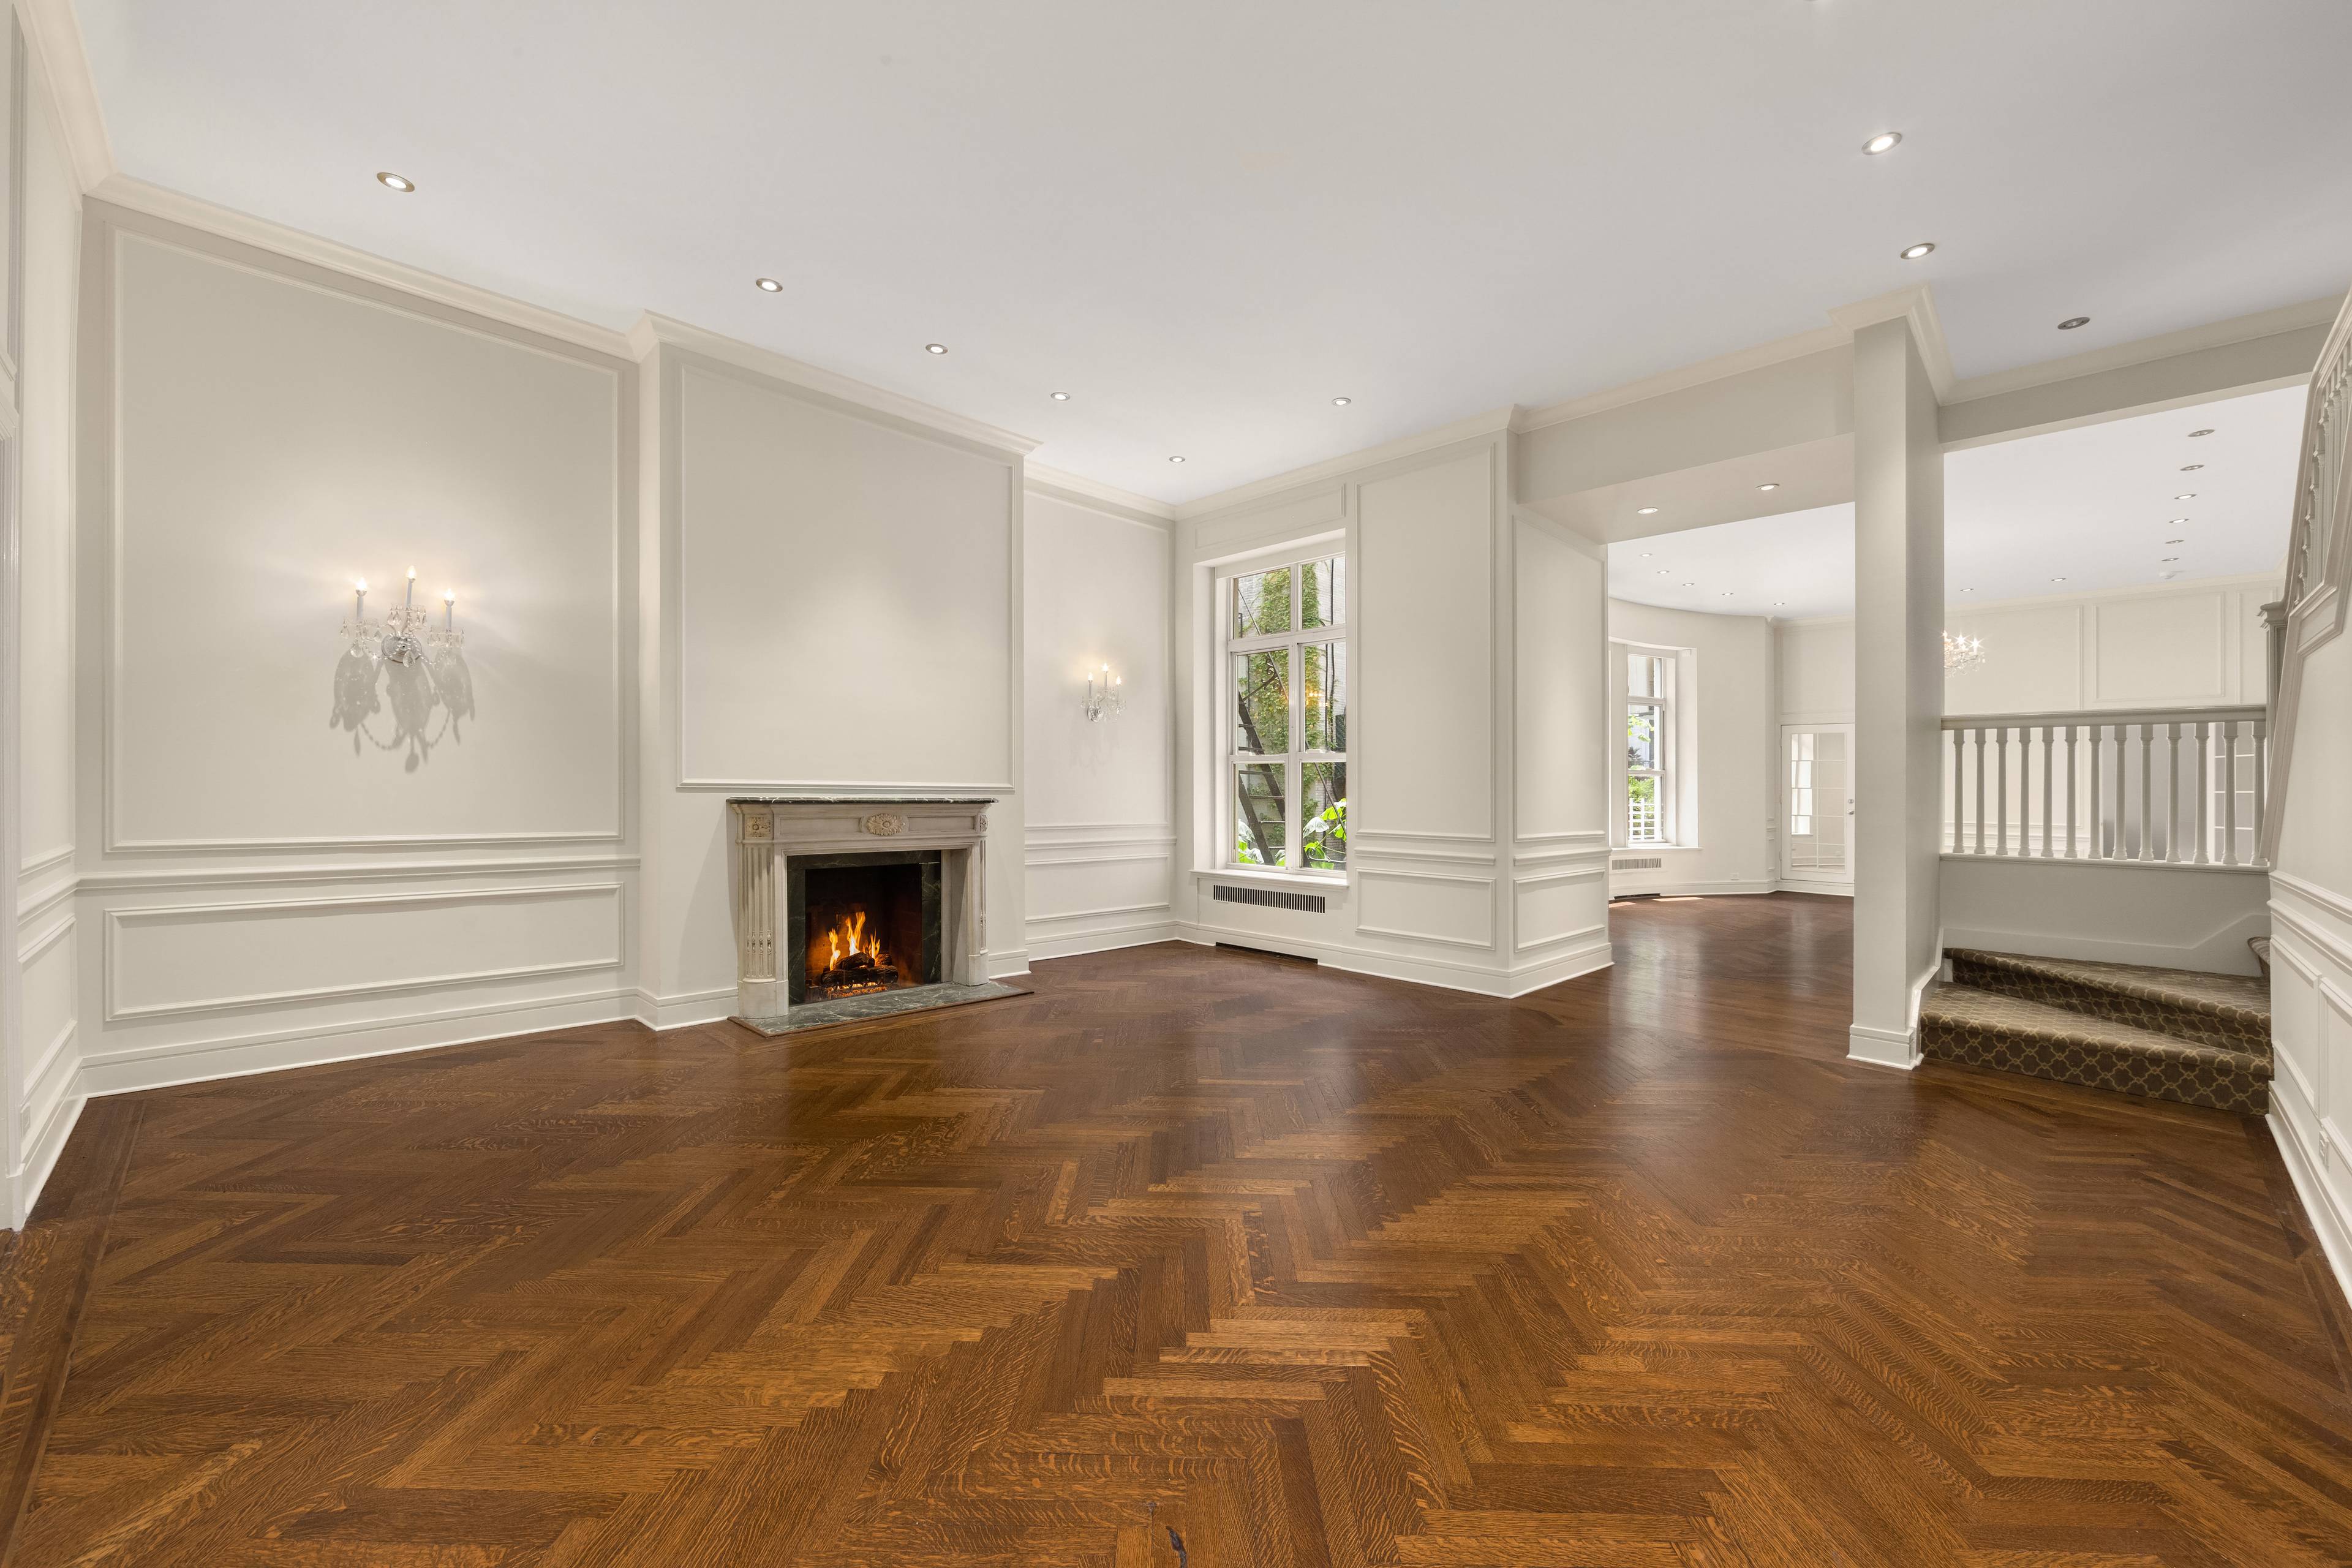 Welcome to Residence 2 3 8 East 63rd, an exceptional 25 wide townhouse located on a tree lined street between Fifth Avenue and Madison Avenue along with the most exquisite ...